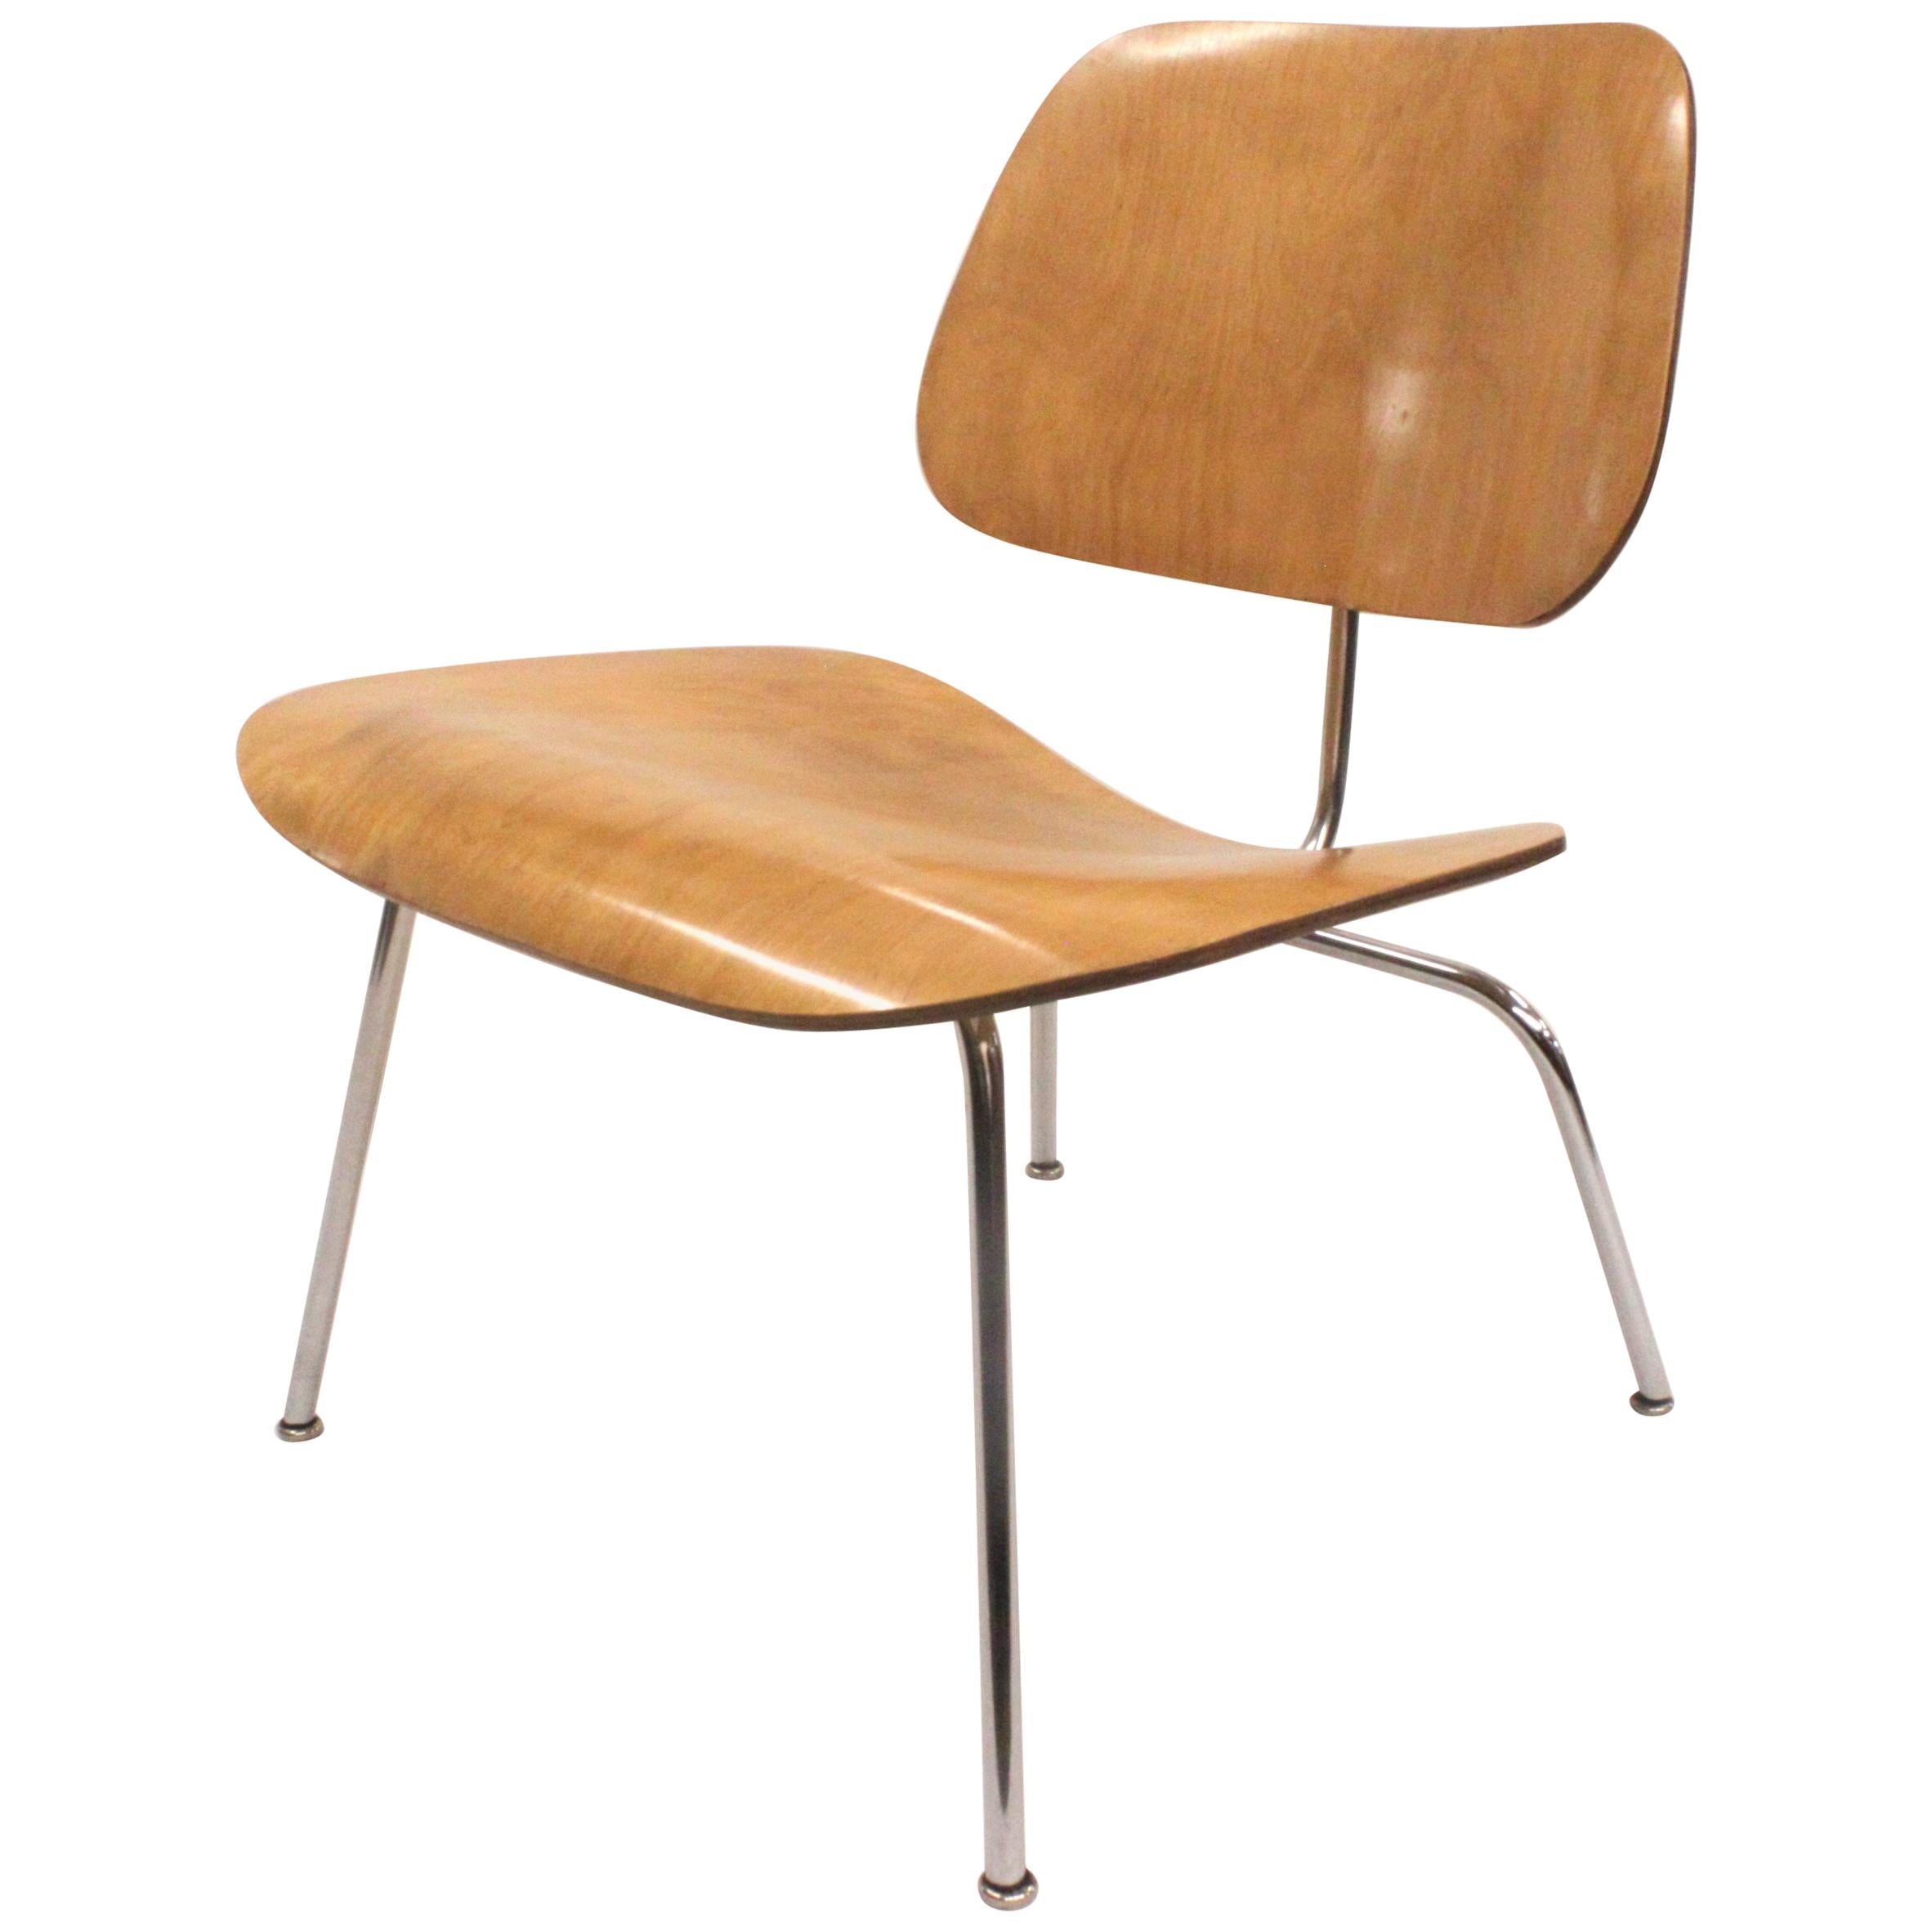 Early 1950s Mid-Century Modern Eames LCM Birch Lounge Chair by Herman Miller